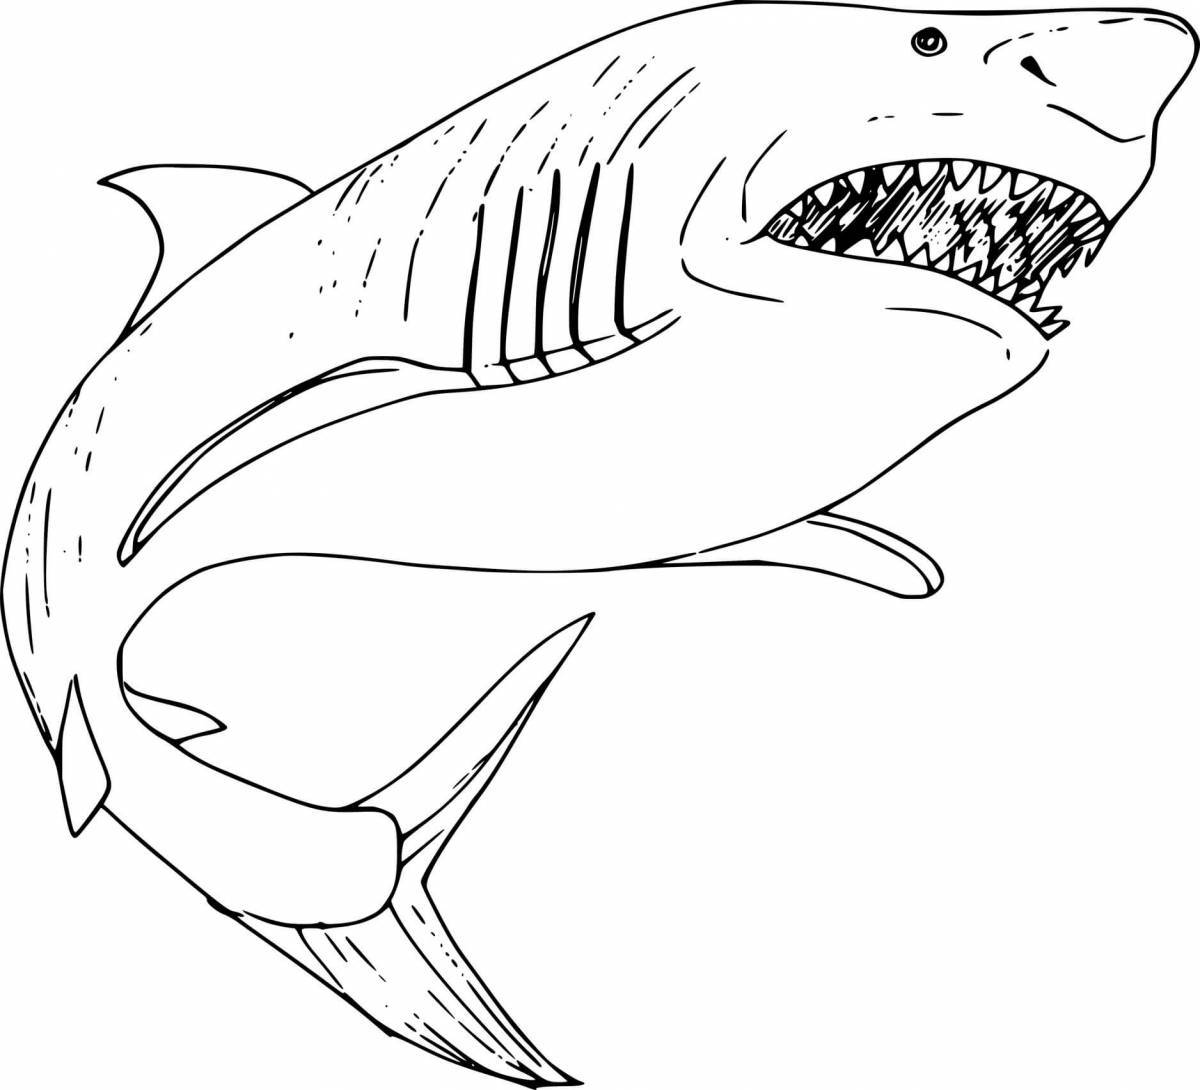 Outstanding megalodon coloring page